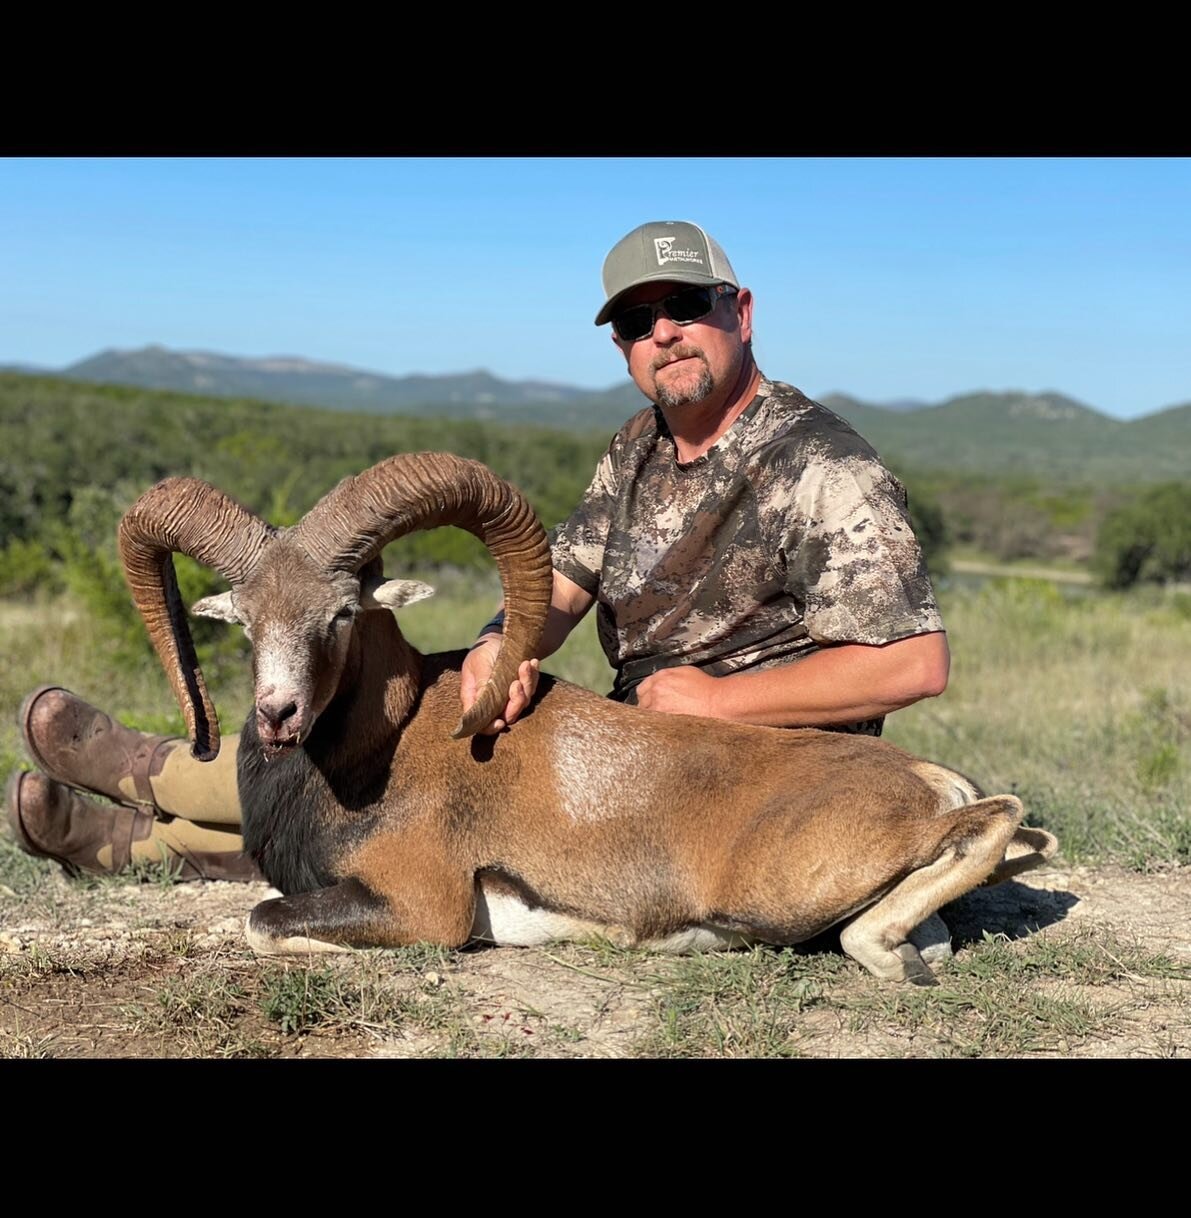 Huge congrats to our buddy Adam on his monster European Mouflon! We always enjoy familiar faces in camp. 

Guide - Kellem Bolton 

If you or anybody you know would like an opportunity at an European Mouflon or one of the other 55 + species we have, l